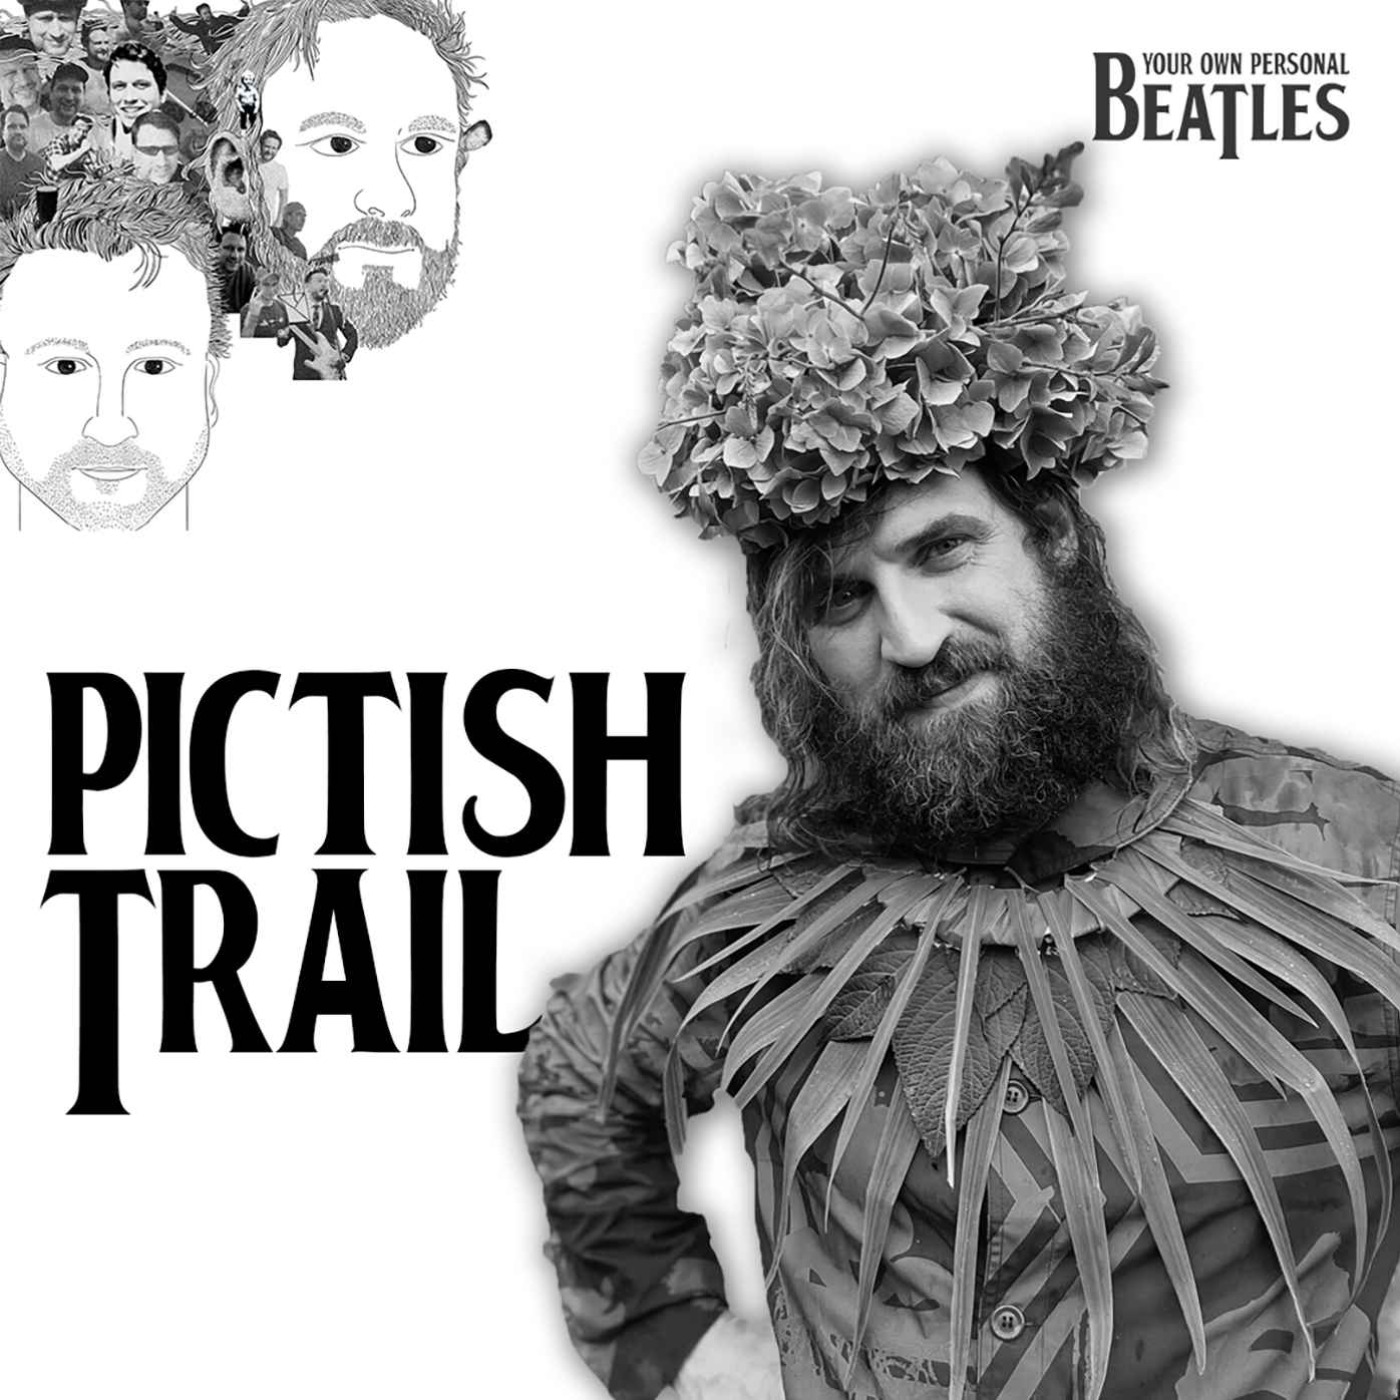 Pictish Trail's Personal Beatles